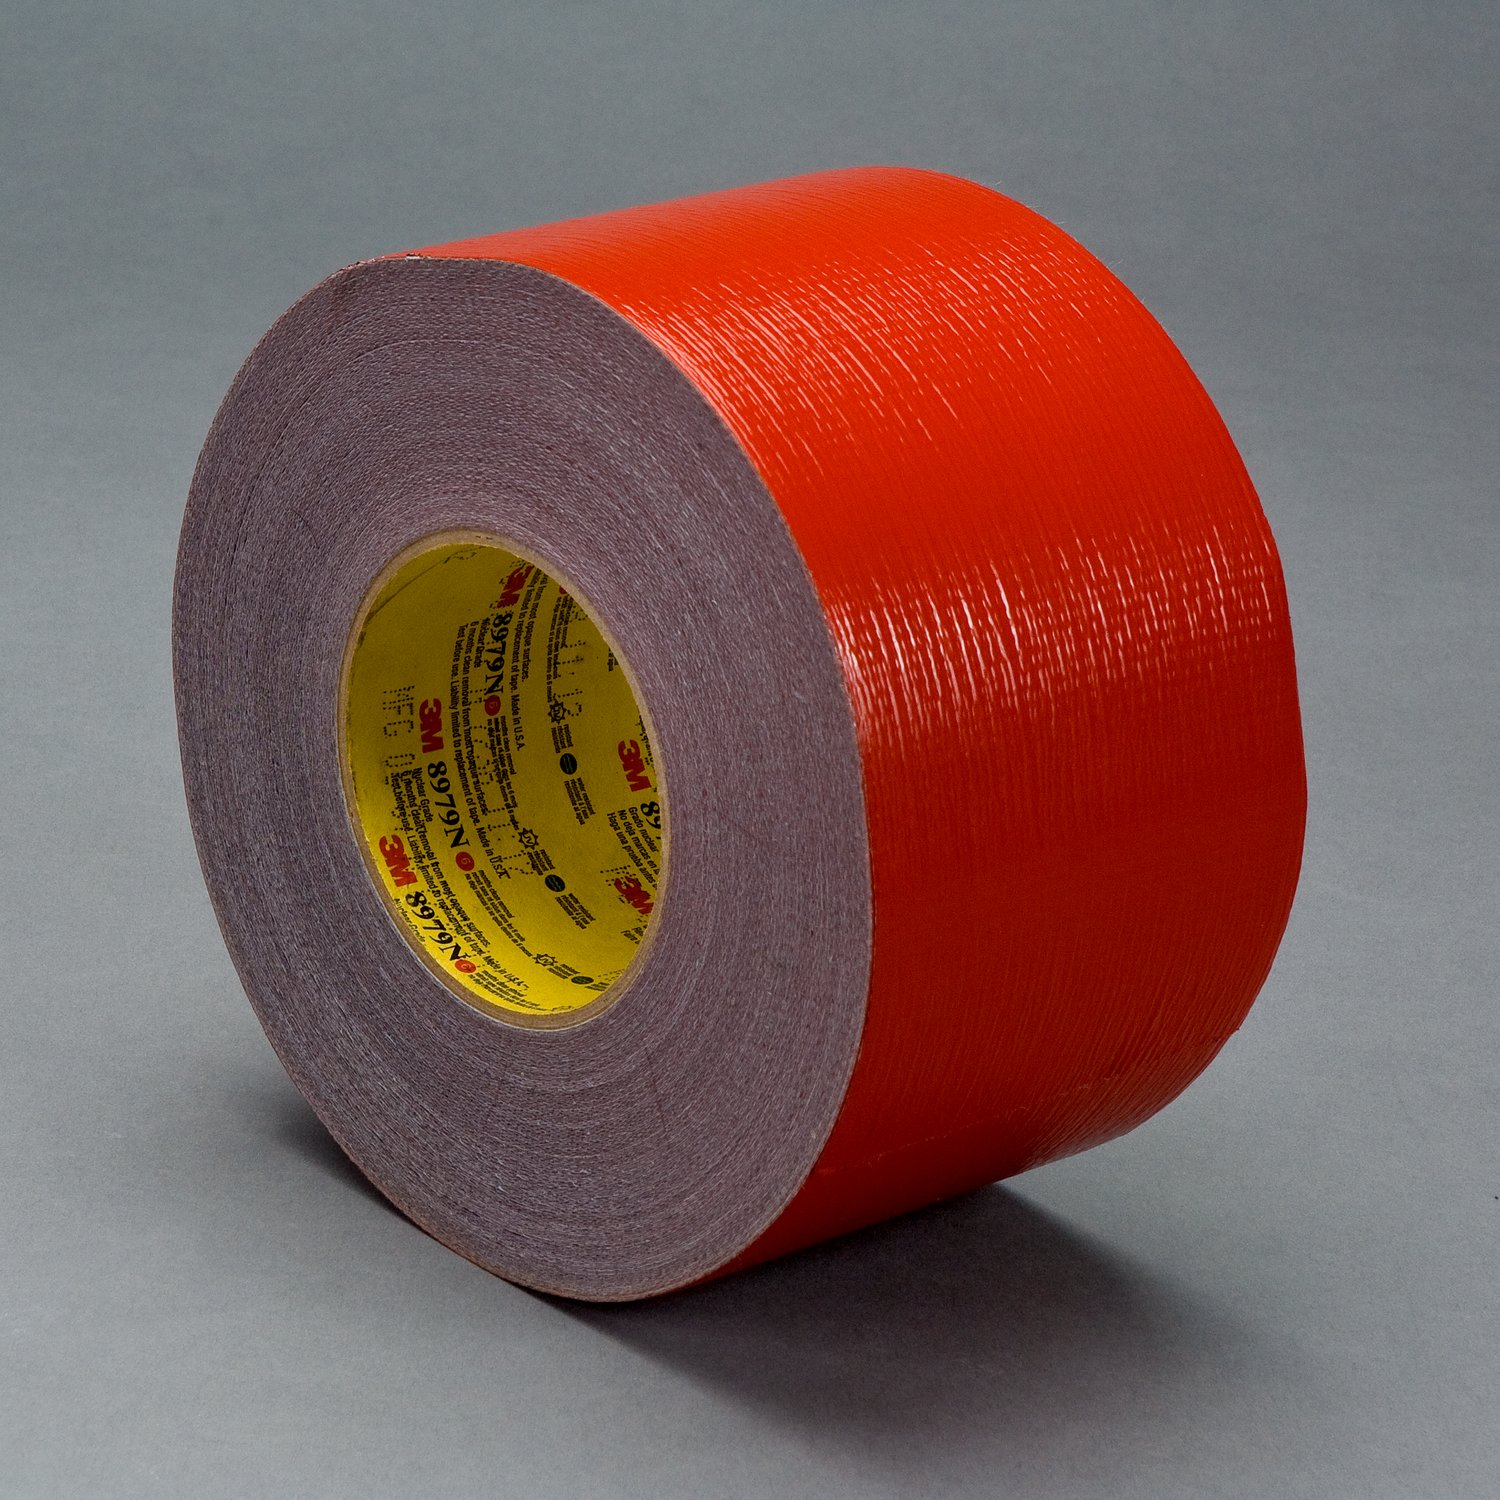 7010335372 - 3M Performance Plus Duct Tape 8979N, Red, Nuclear, 48 mm x 54.8 m, 24/Case, Restricted